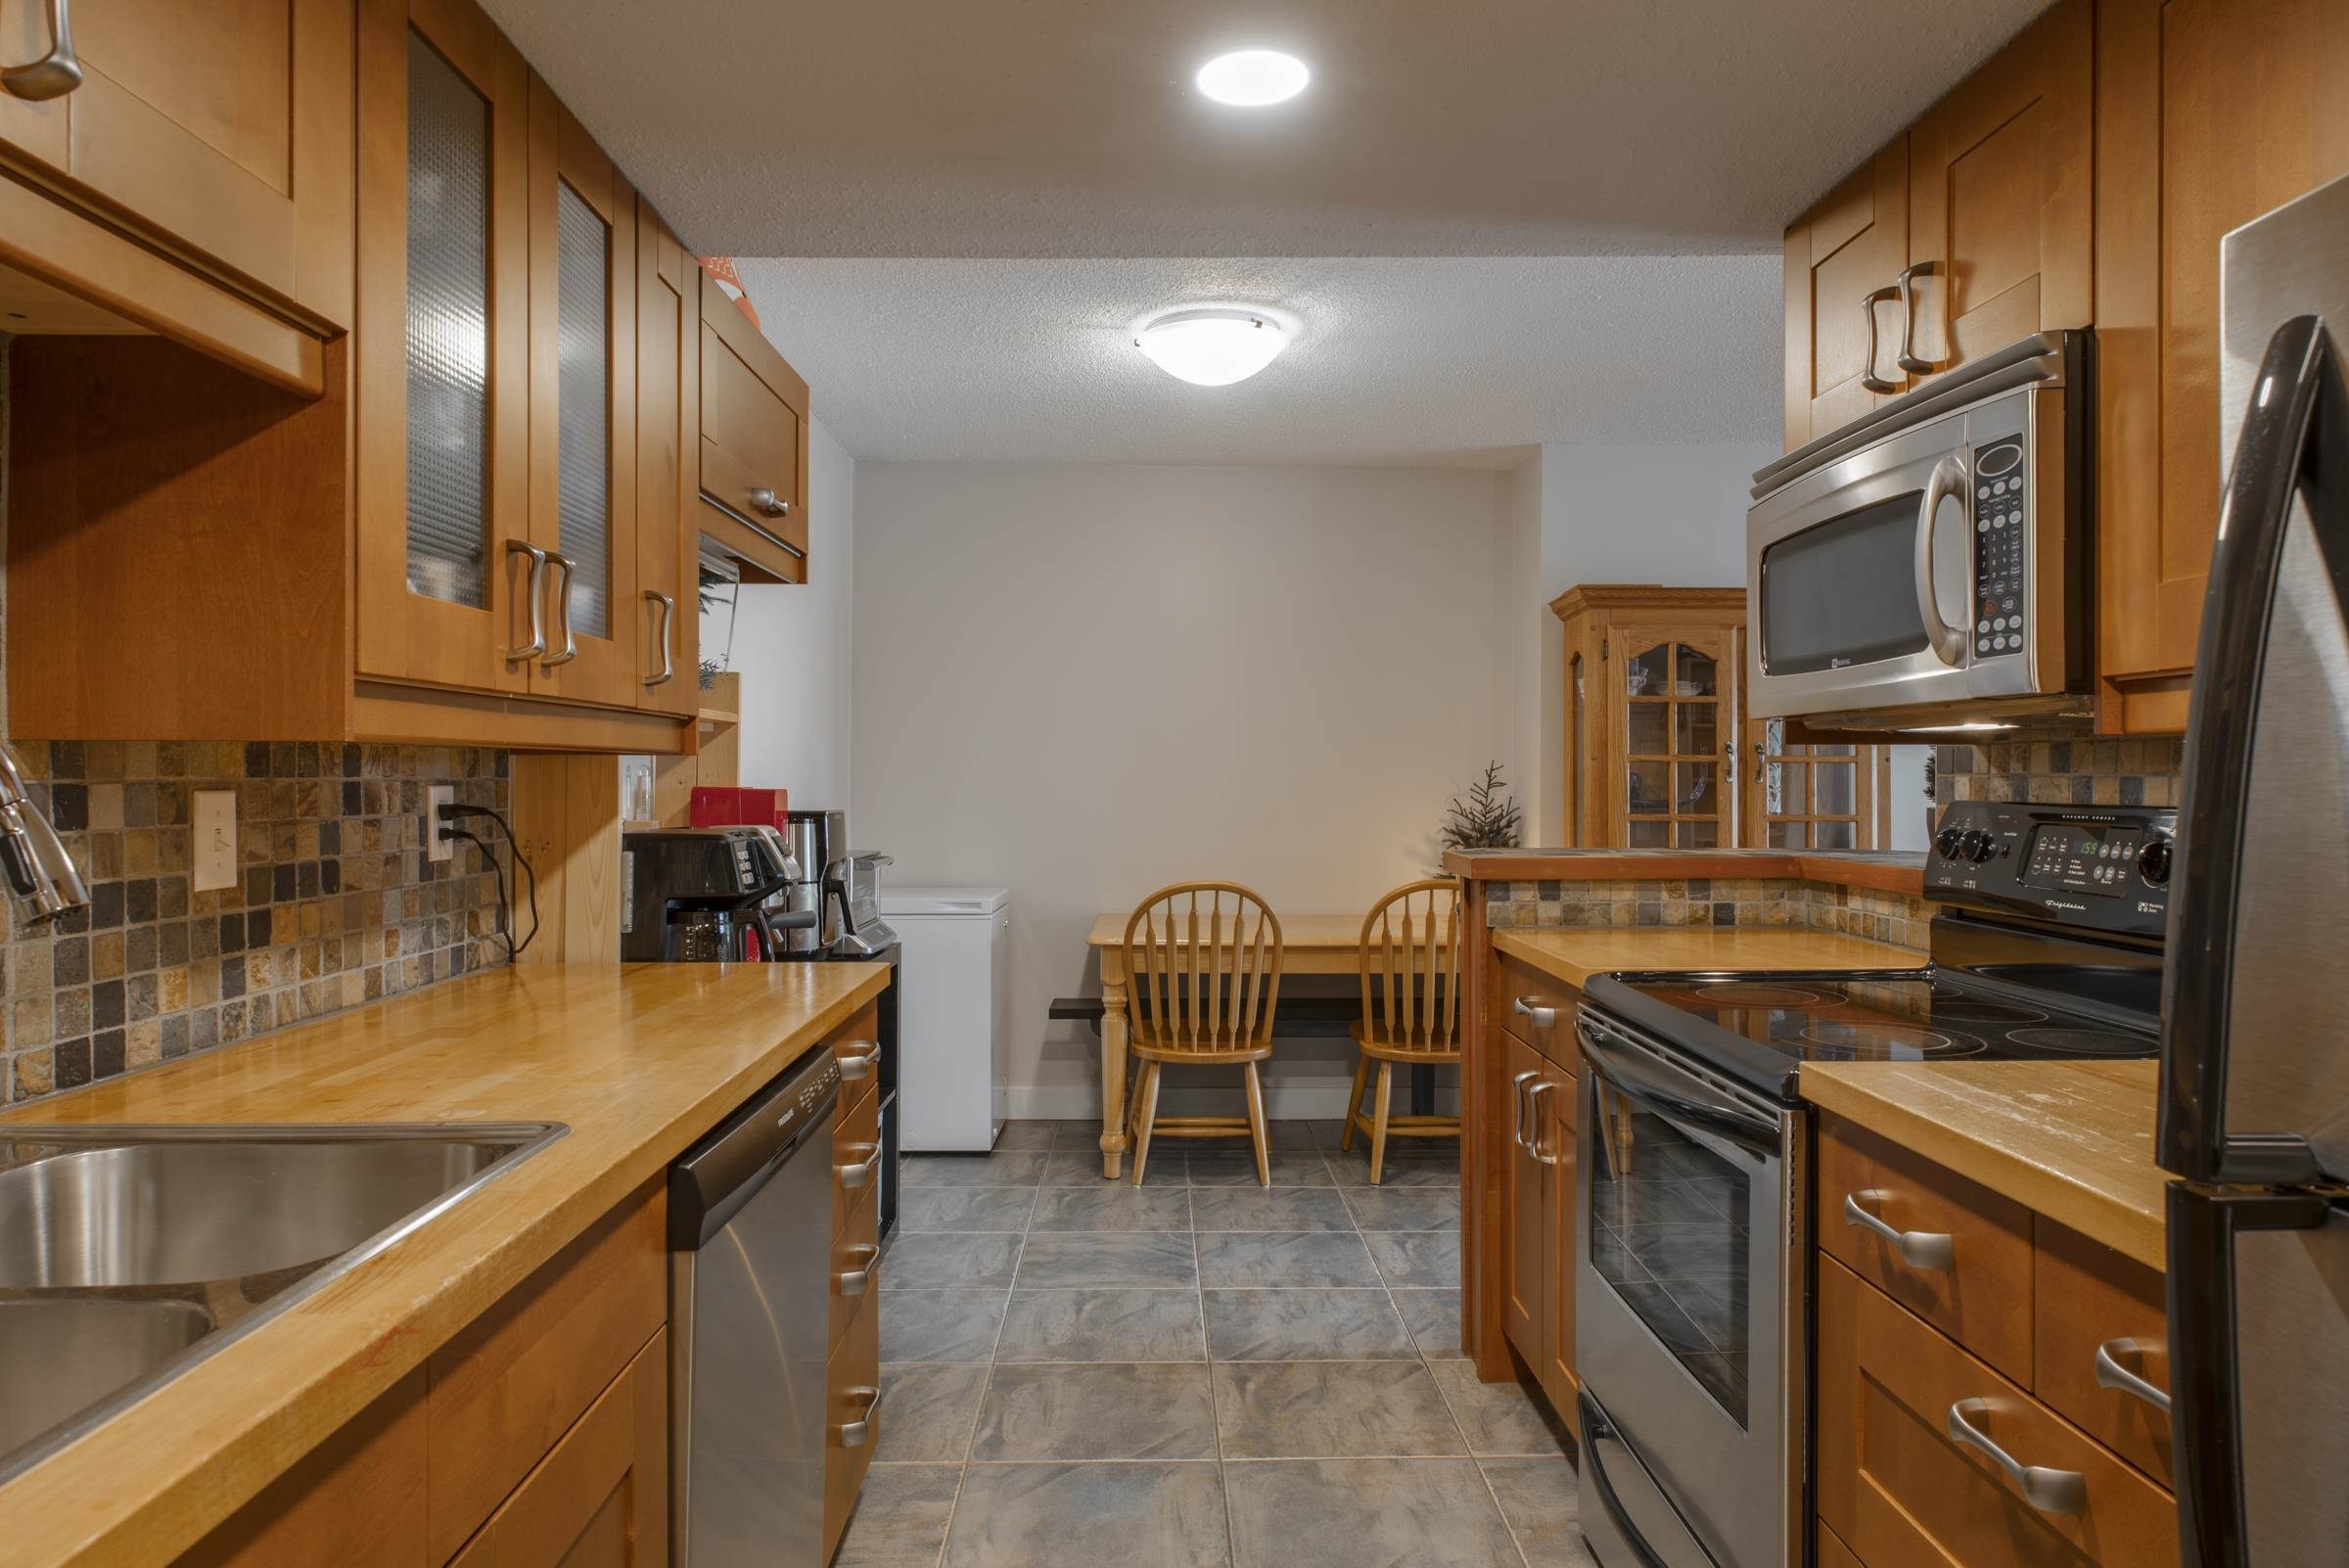 204 119 Agnes Street, Downtown - r2865517 Image